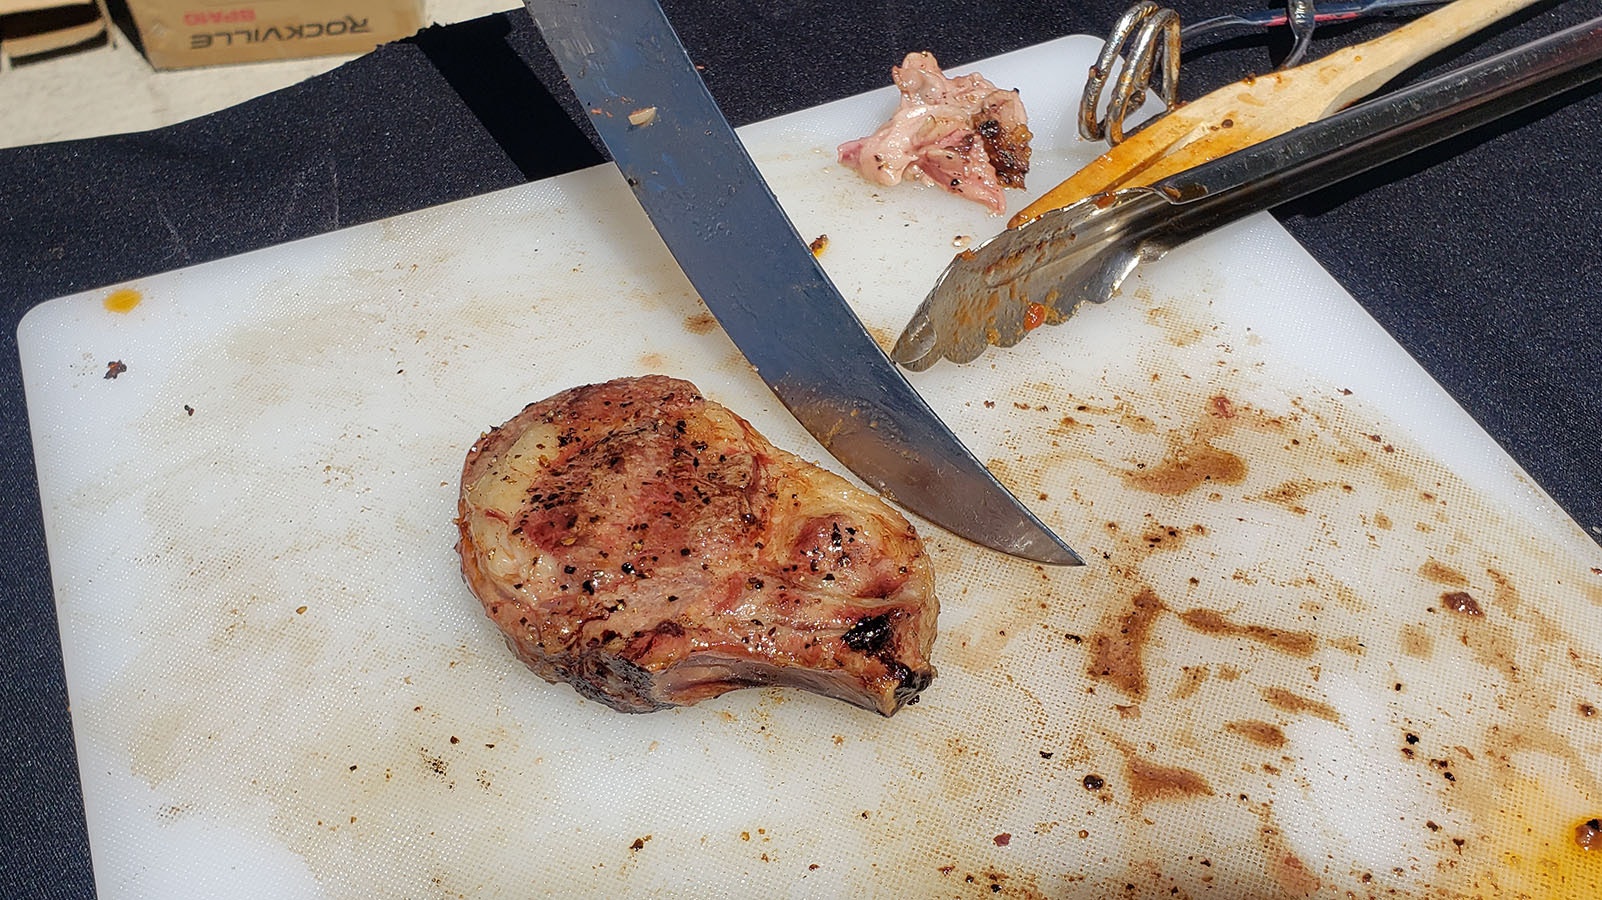 Lamb steaks seasoned with a little garlic salt are cooked on the grill a bit like a steak to medium rare and drew rave reviews during a recent cooking demonstration in Kemmerer.